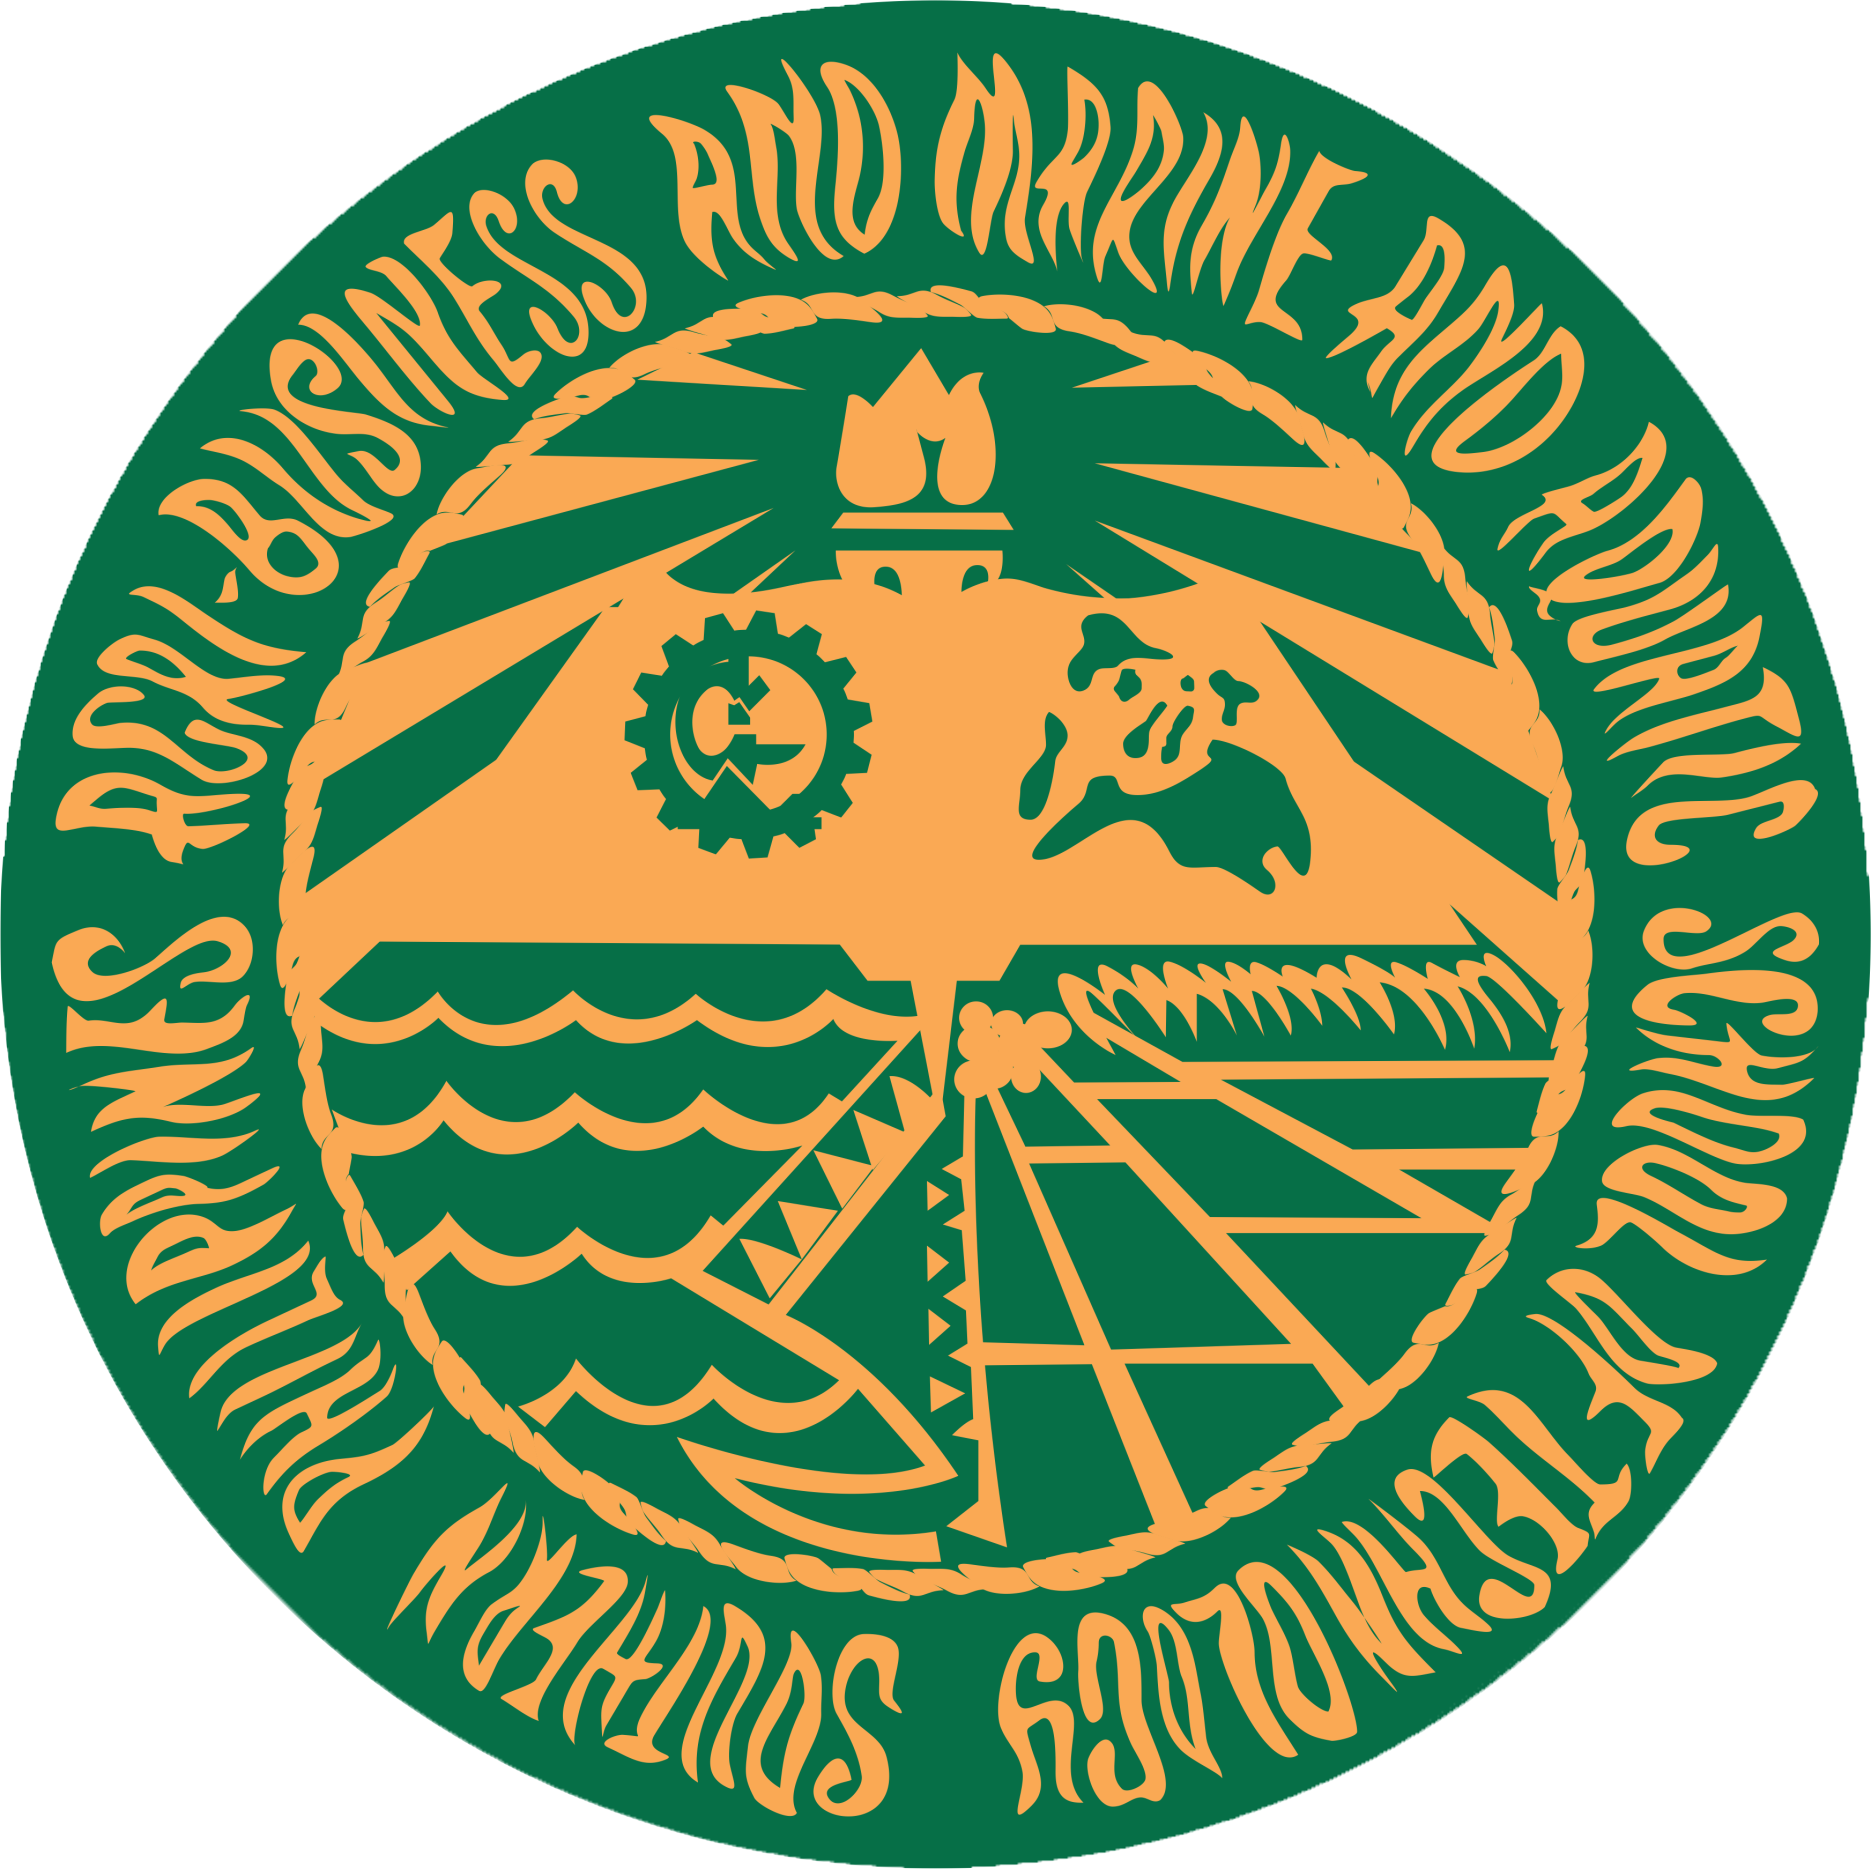 You are currently viewing Southern Philippines Agri-Business and Marine and Aquatic School of Technology (SPAMAST)